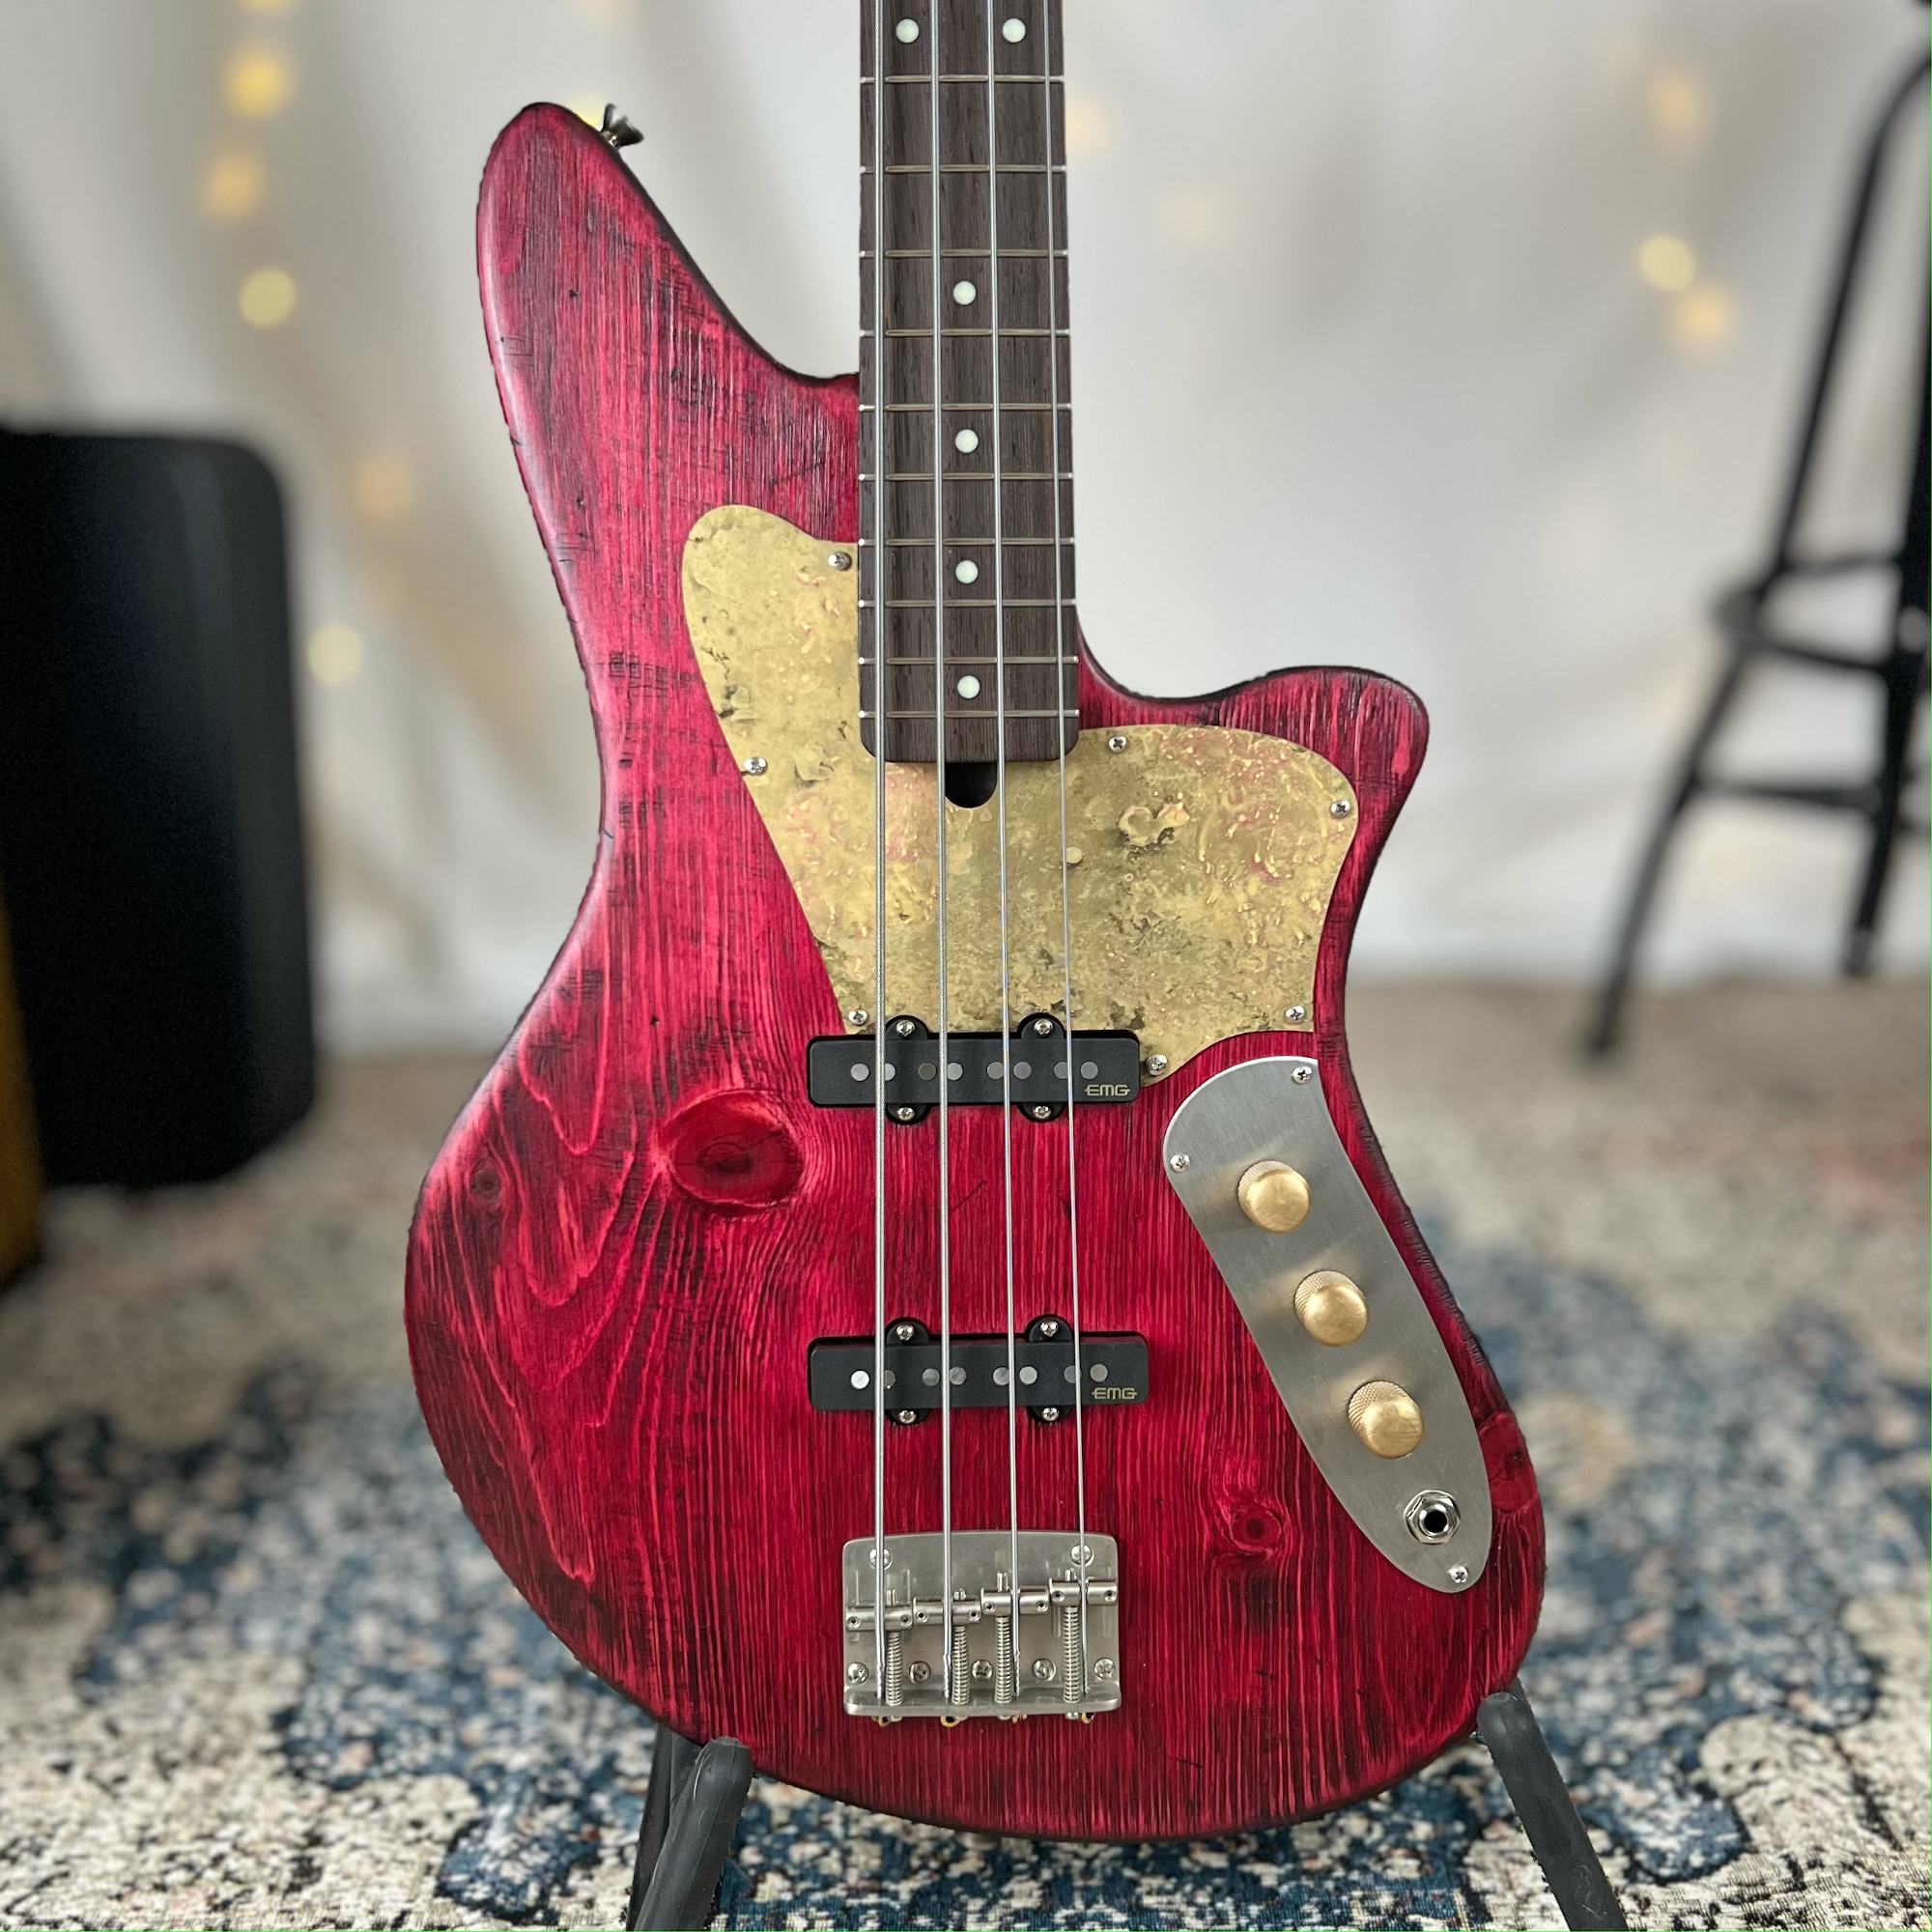 Jacqueline J2 32" Medium-Scale Bass in Bordeaux Glow on Distressed Pine with EMG JVHZ Pickup Set